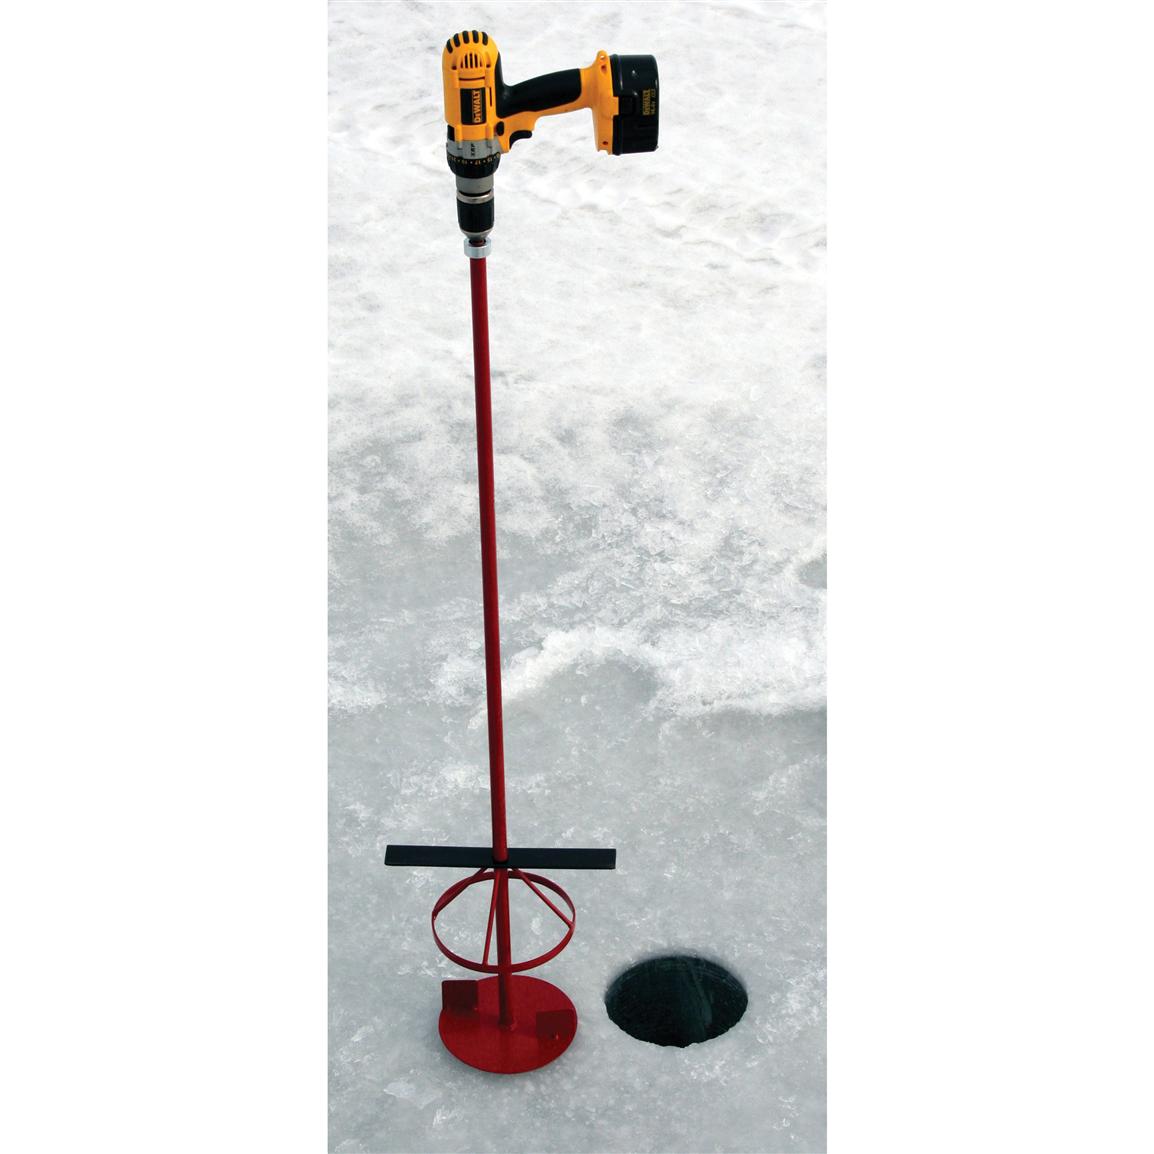 ice fishing accessories